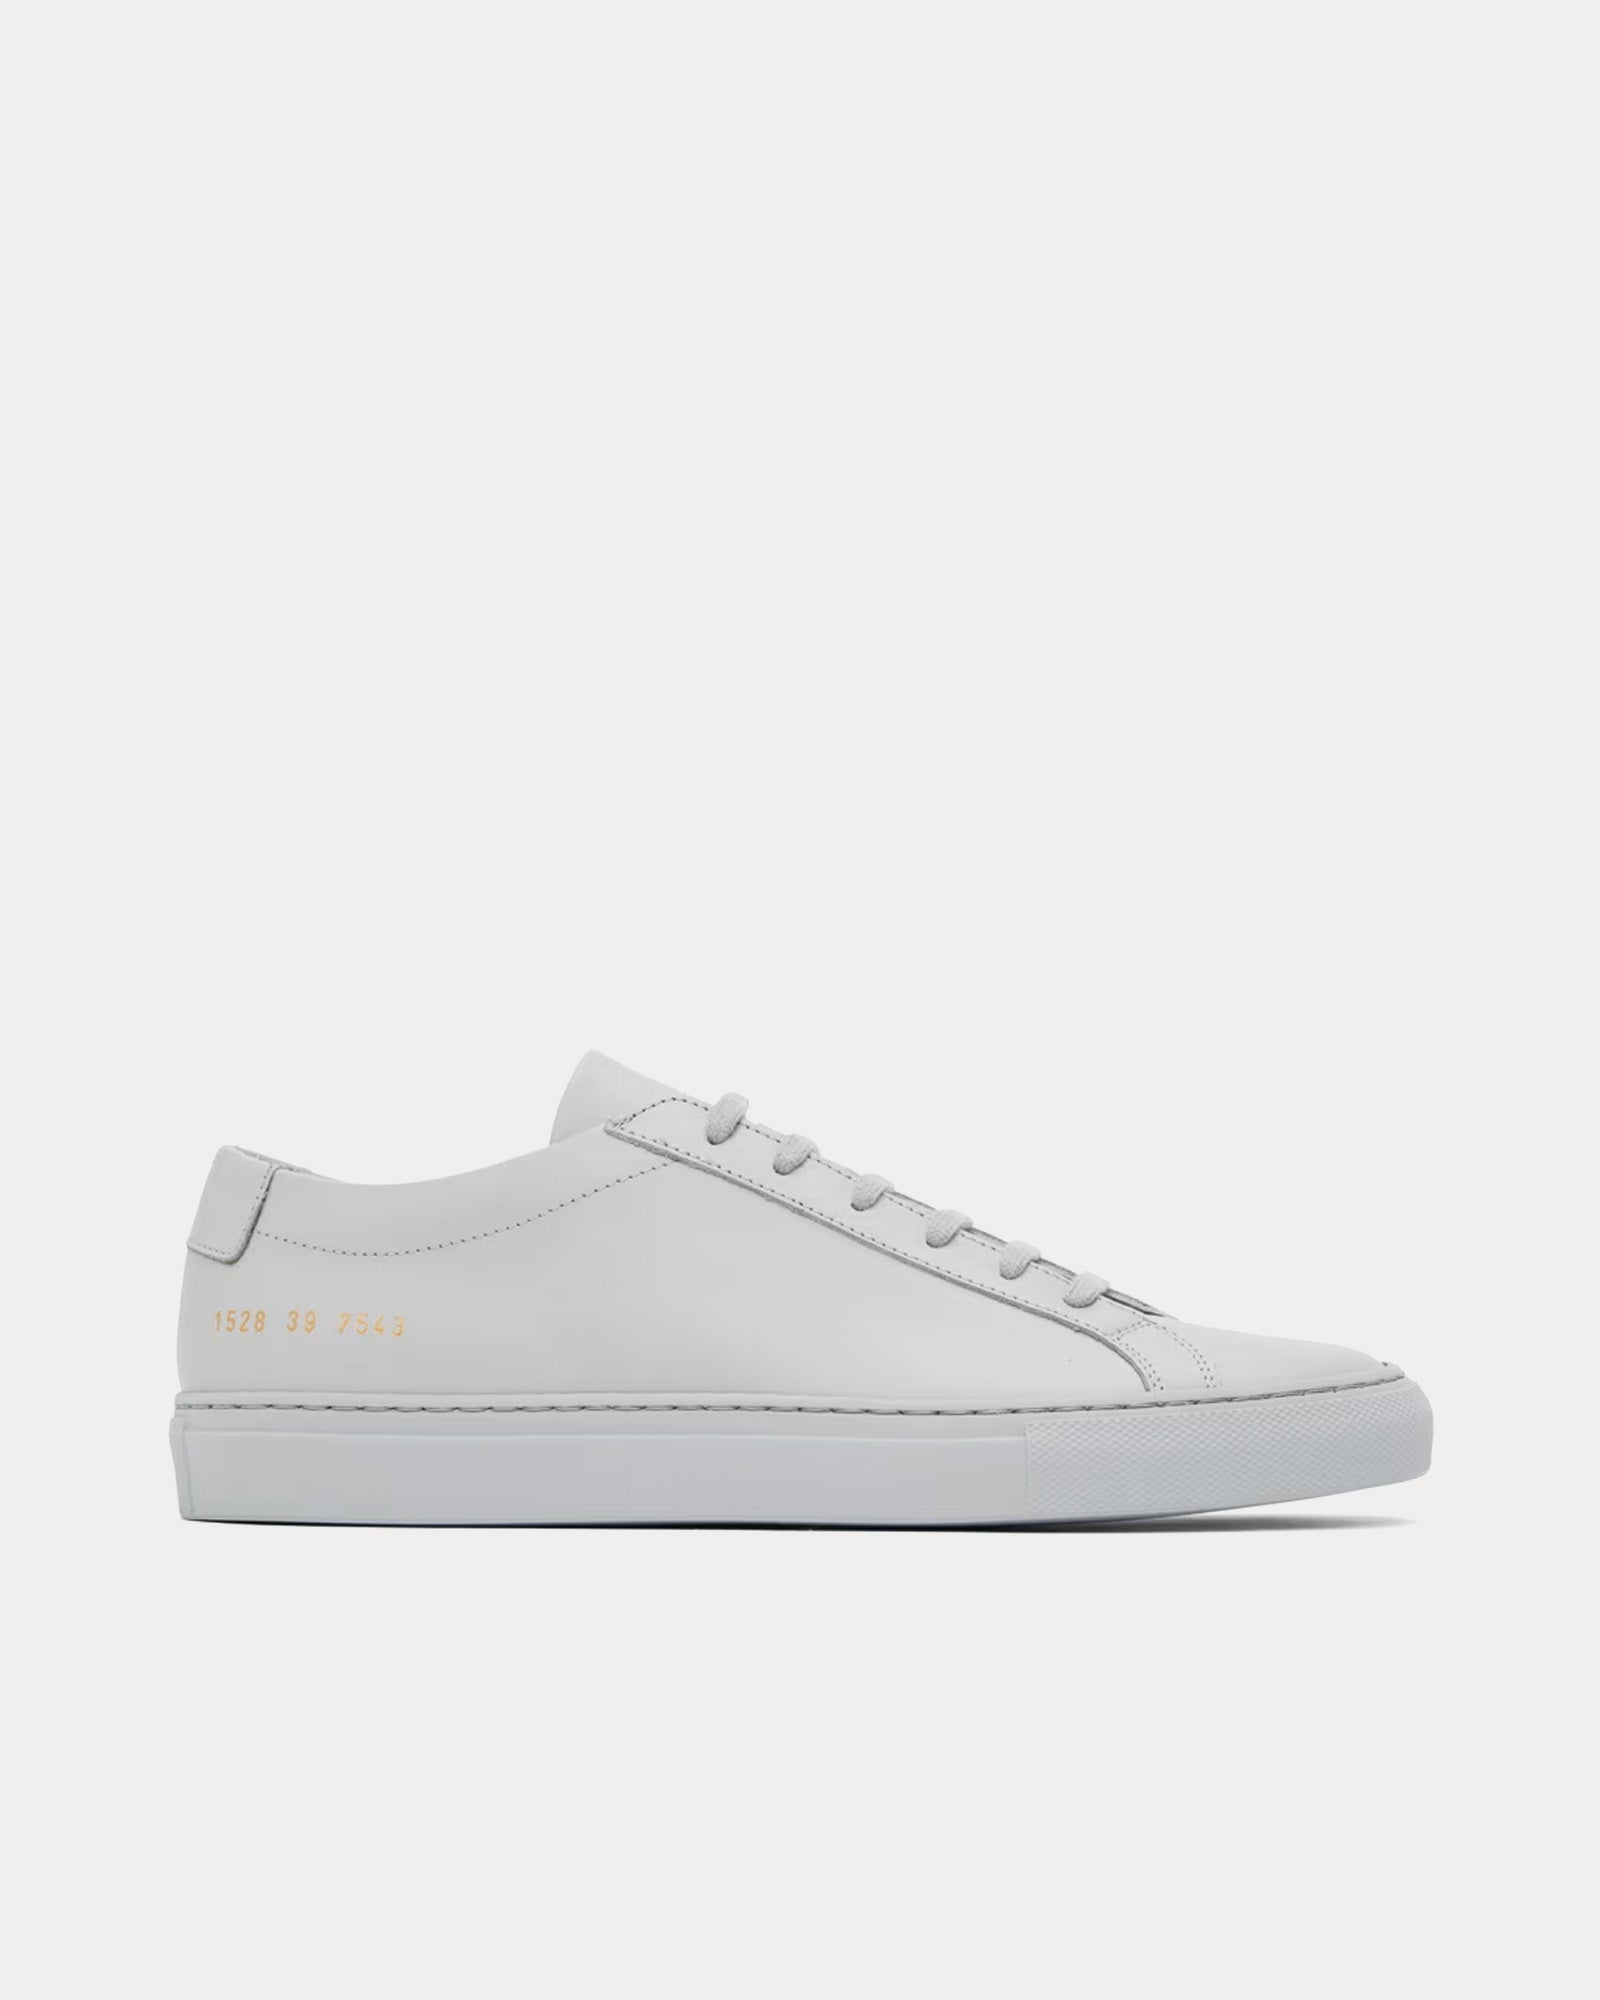 Common Projects - Original Achilles Leather Grey Low Top Sneakers